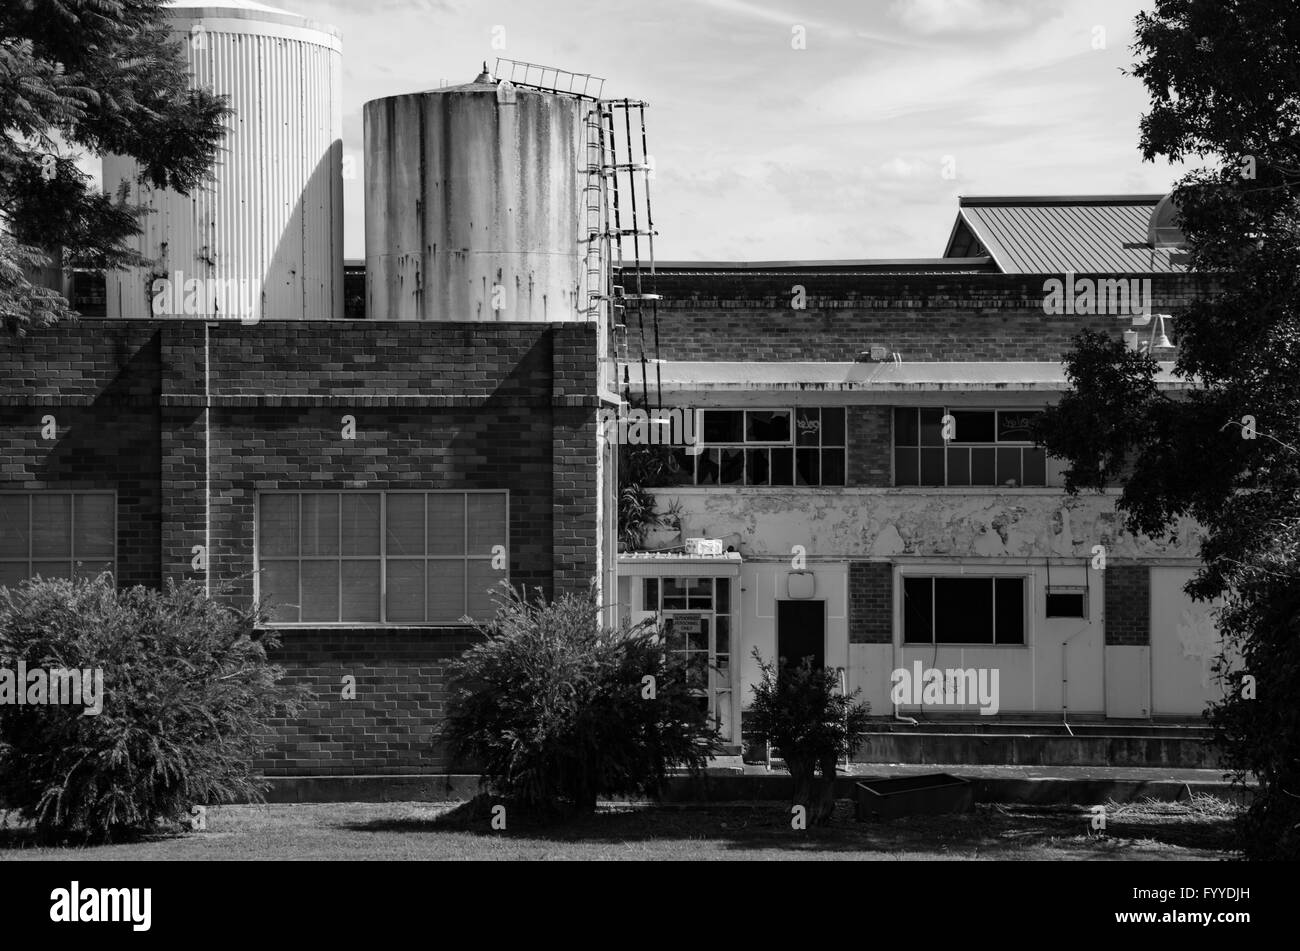 Part of the now closed Peters Ice cream factory, with external tanks on the roof, built in 1939 Stock Photo